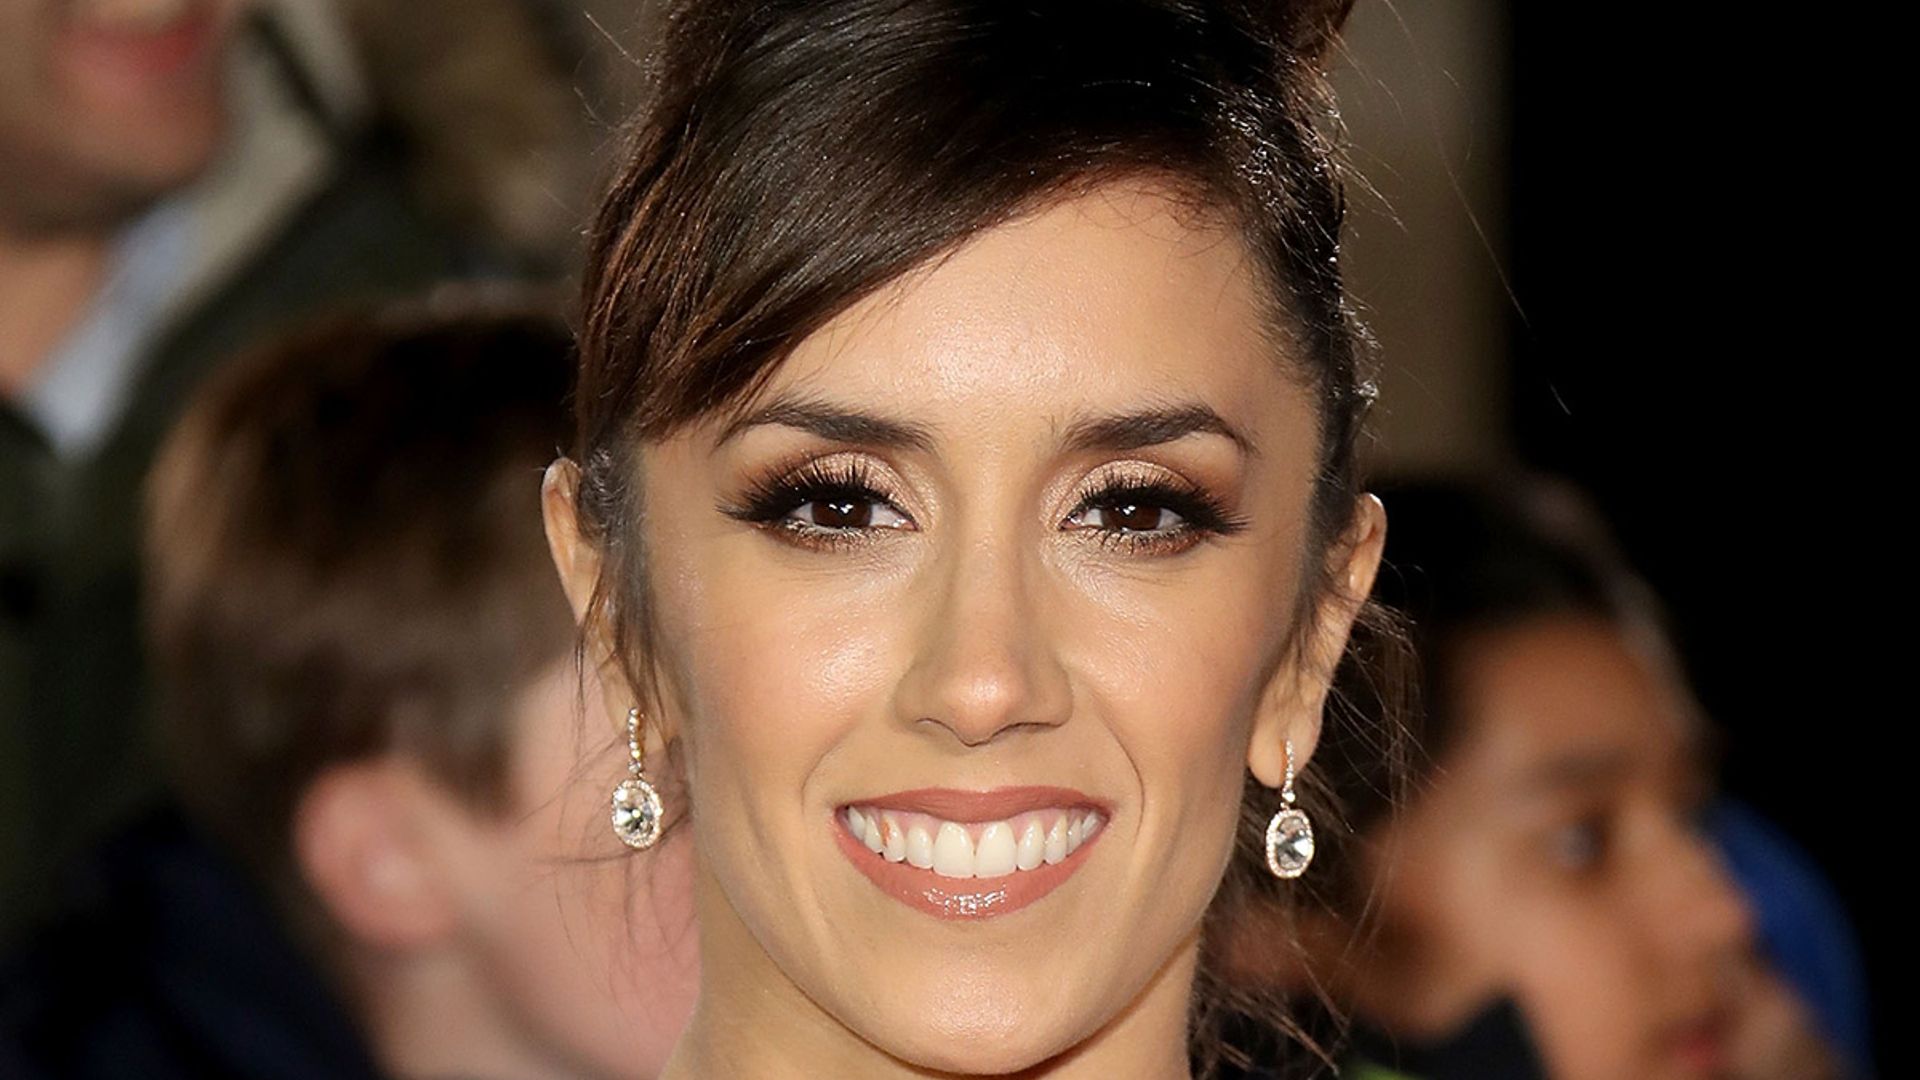 Janette Manrara looks picture perfect in stylish bikini and sheer covering